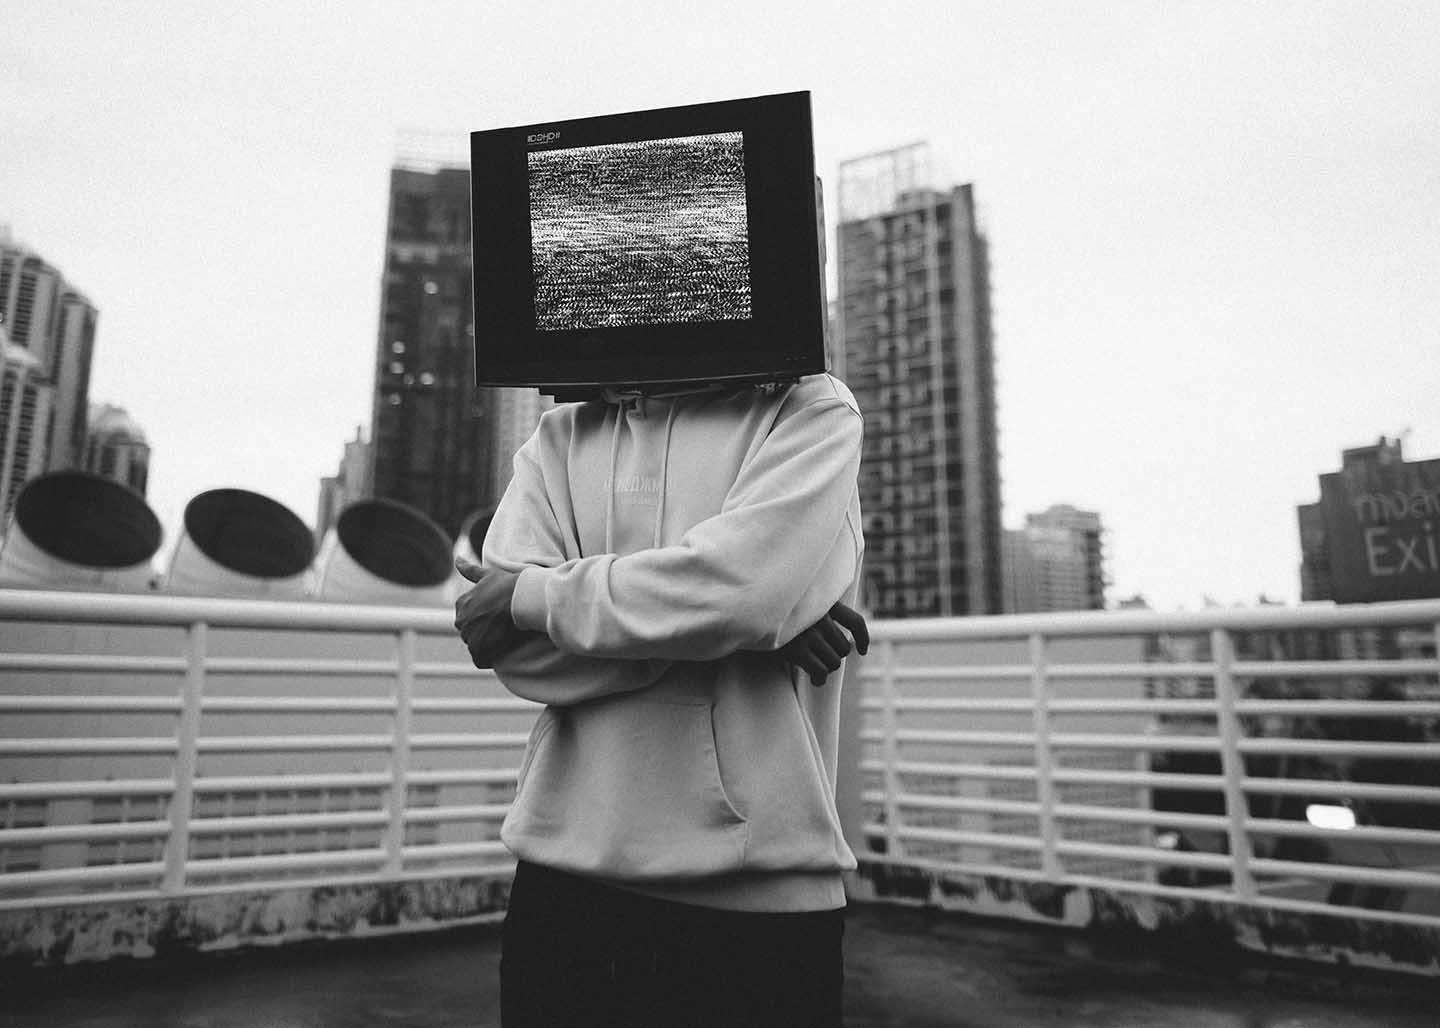 Man on the rooftop with a TV where his head should be